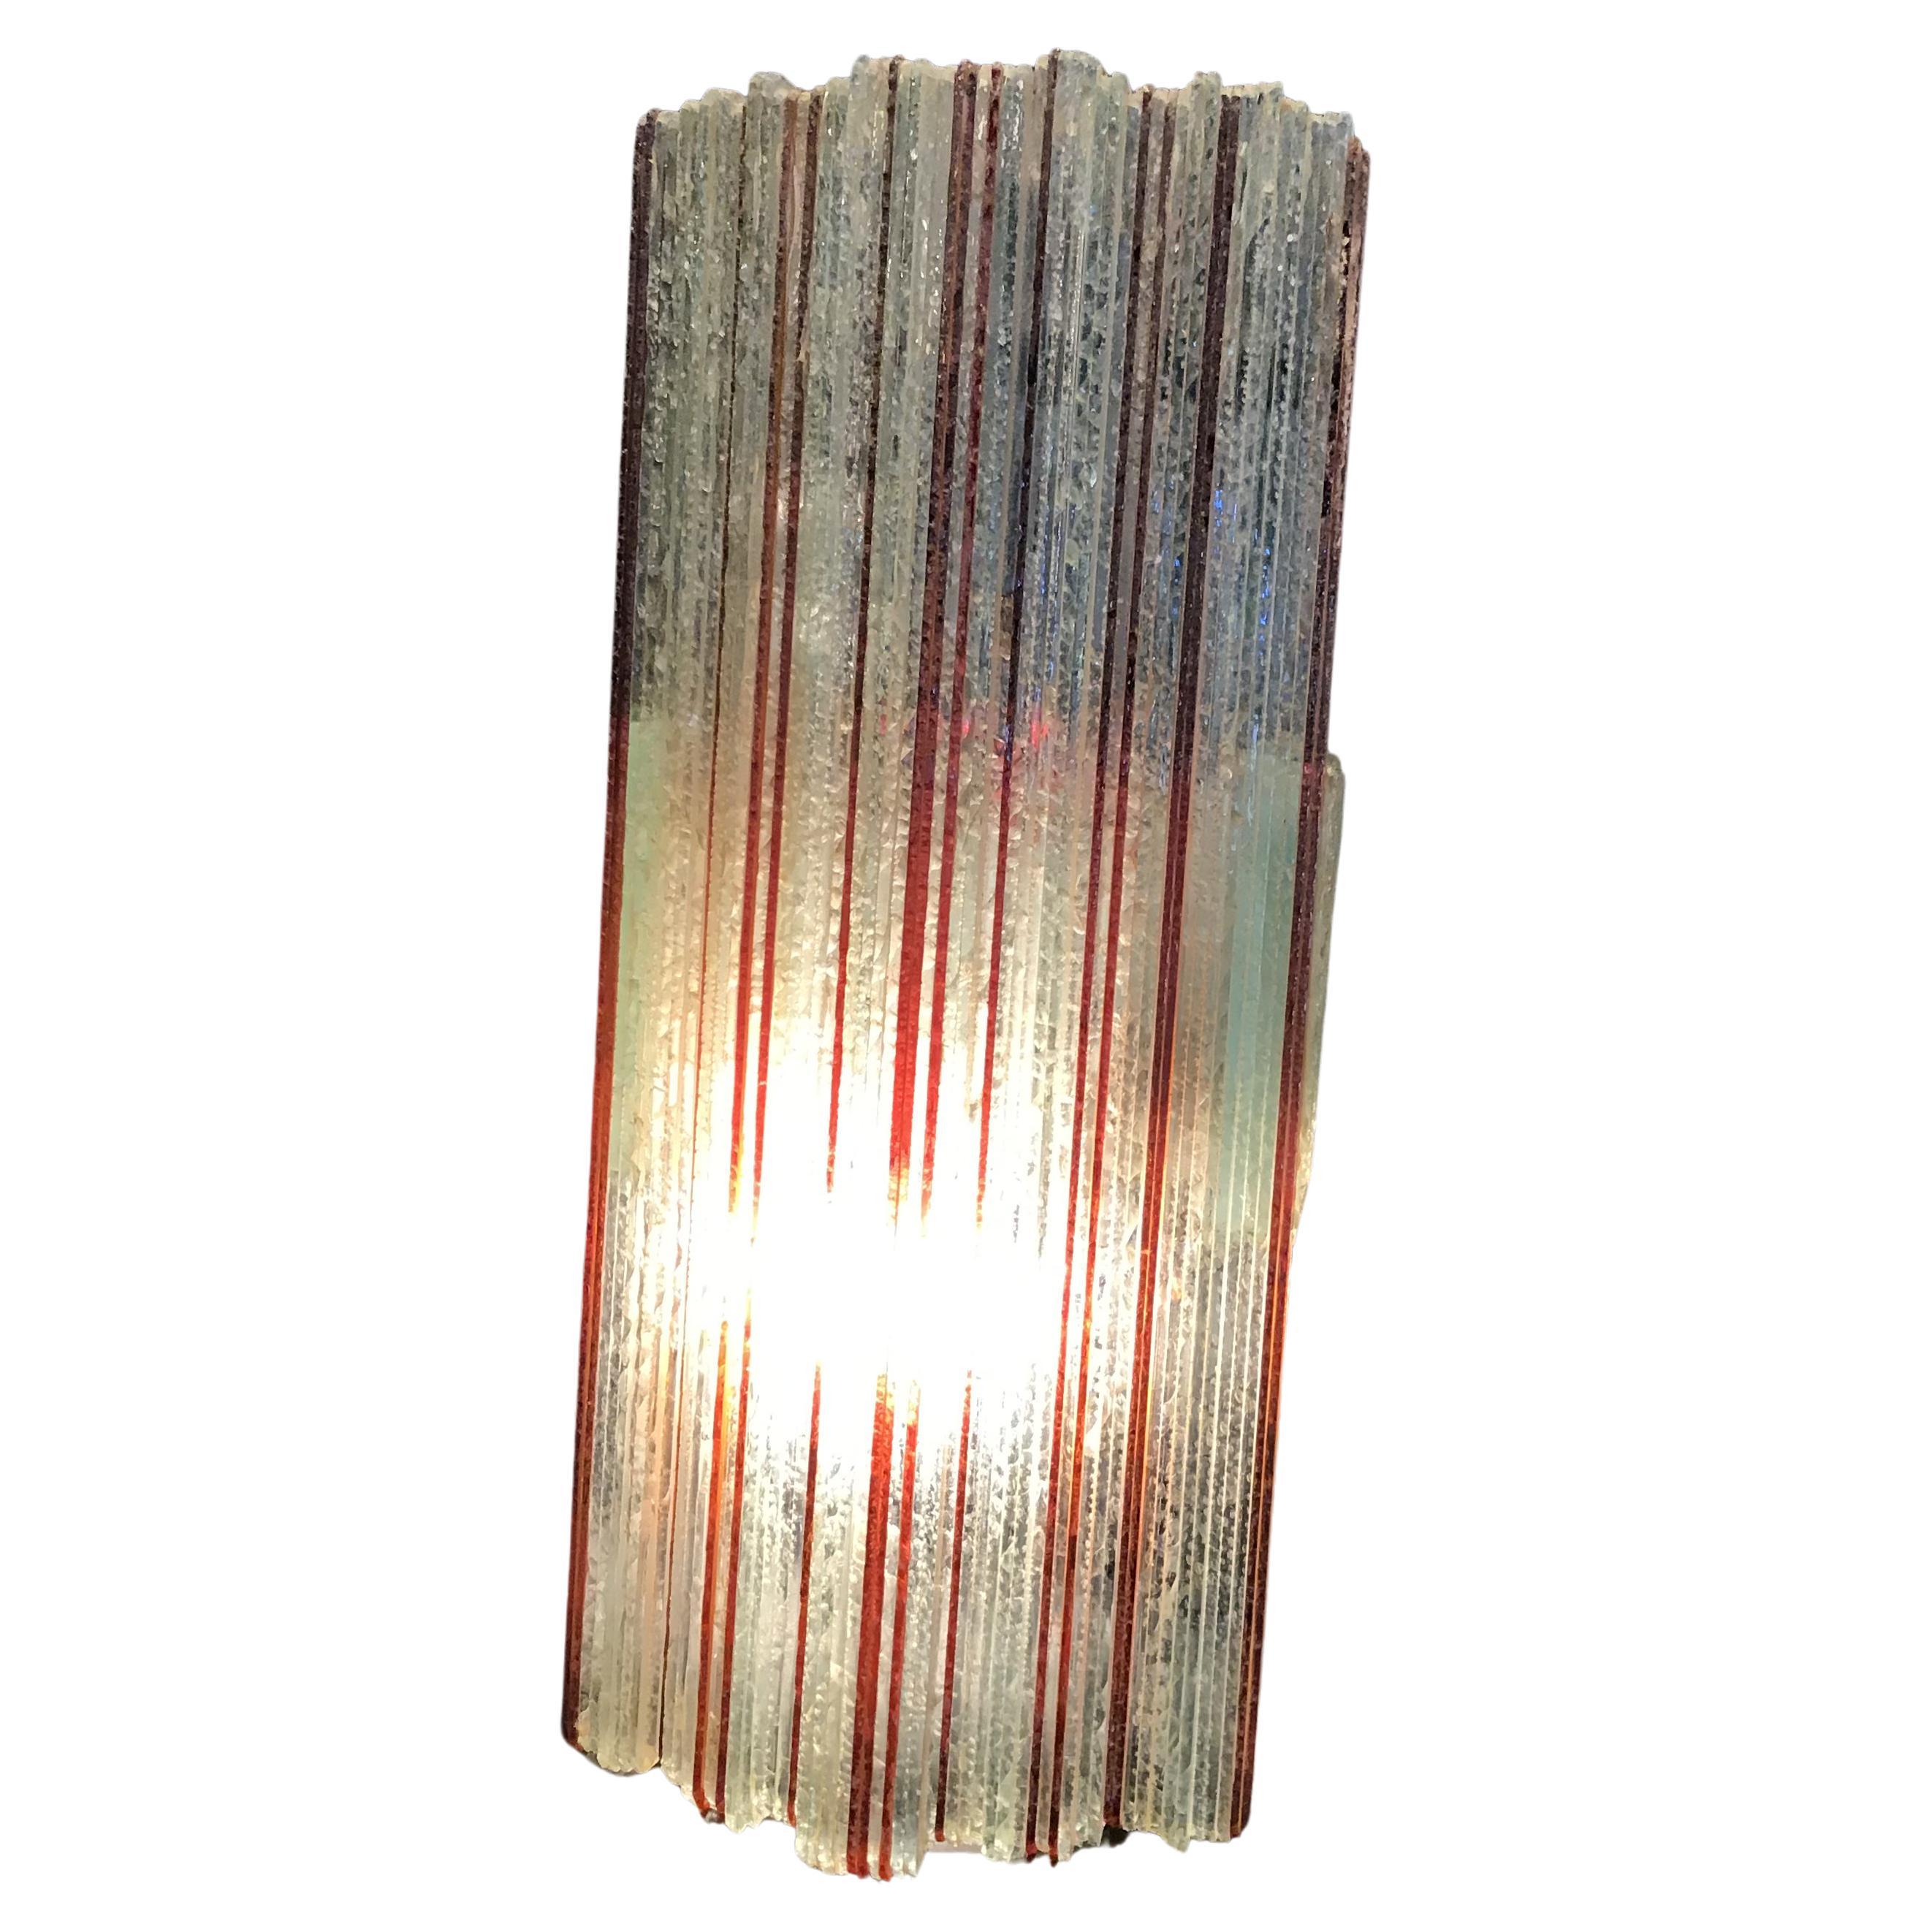 Albano Poli Sconce Glass Metal 1960 Italy For Sale